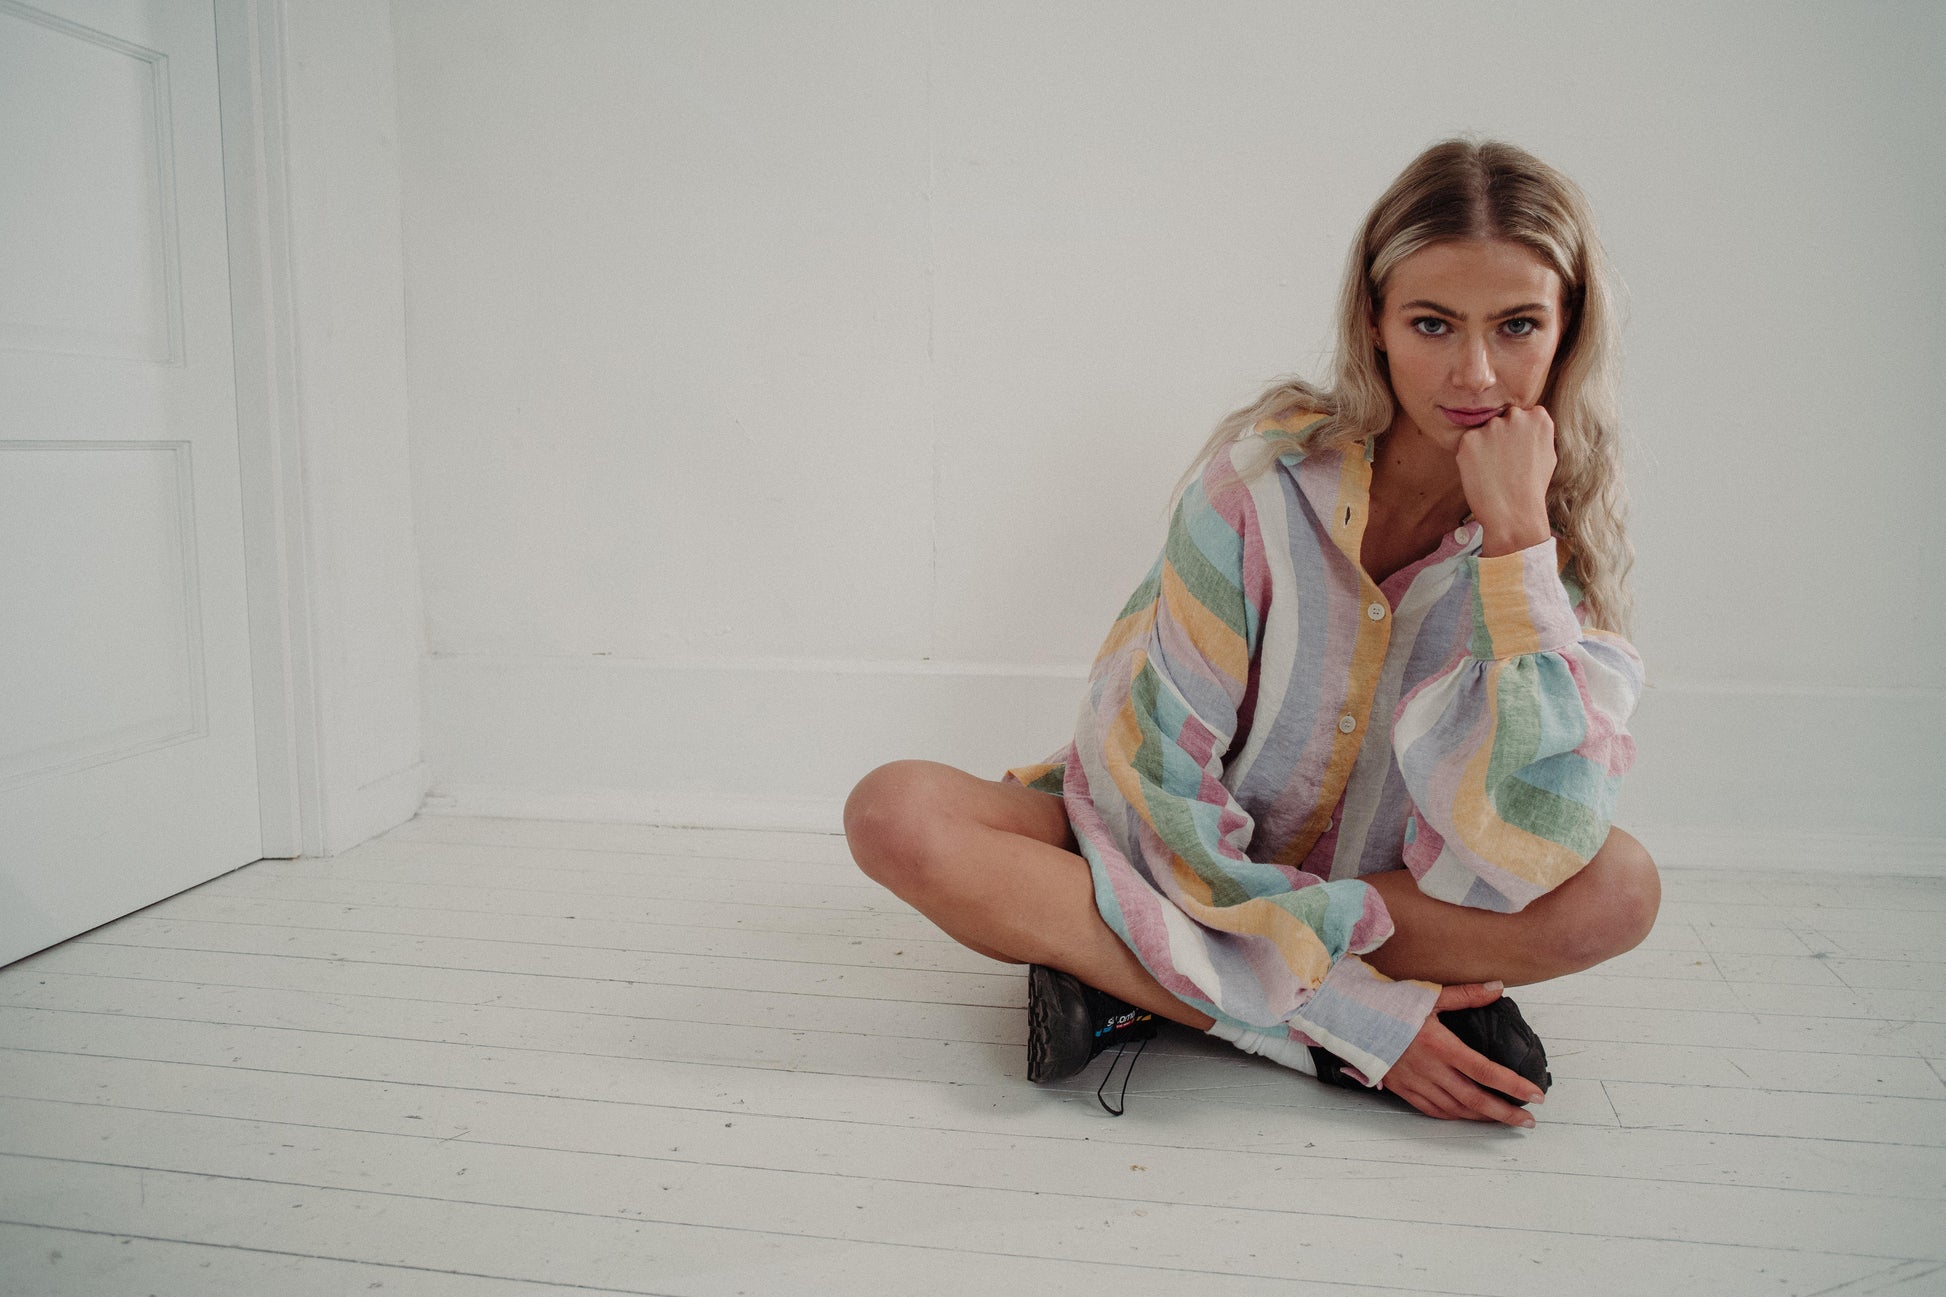 DOVE CADHLA SET | SHORTS | Our original Cadhla shirt set made with custom designed, rainbow Irish linen. This is such a 'feel good' summer set. Wear together or as separates - the combination of pastel stripes with voluminous sleeves are sure to put you i